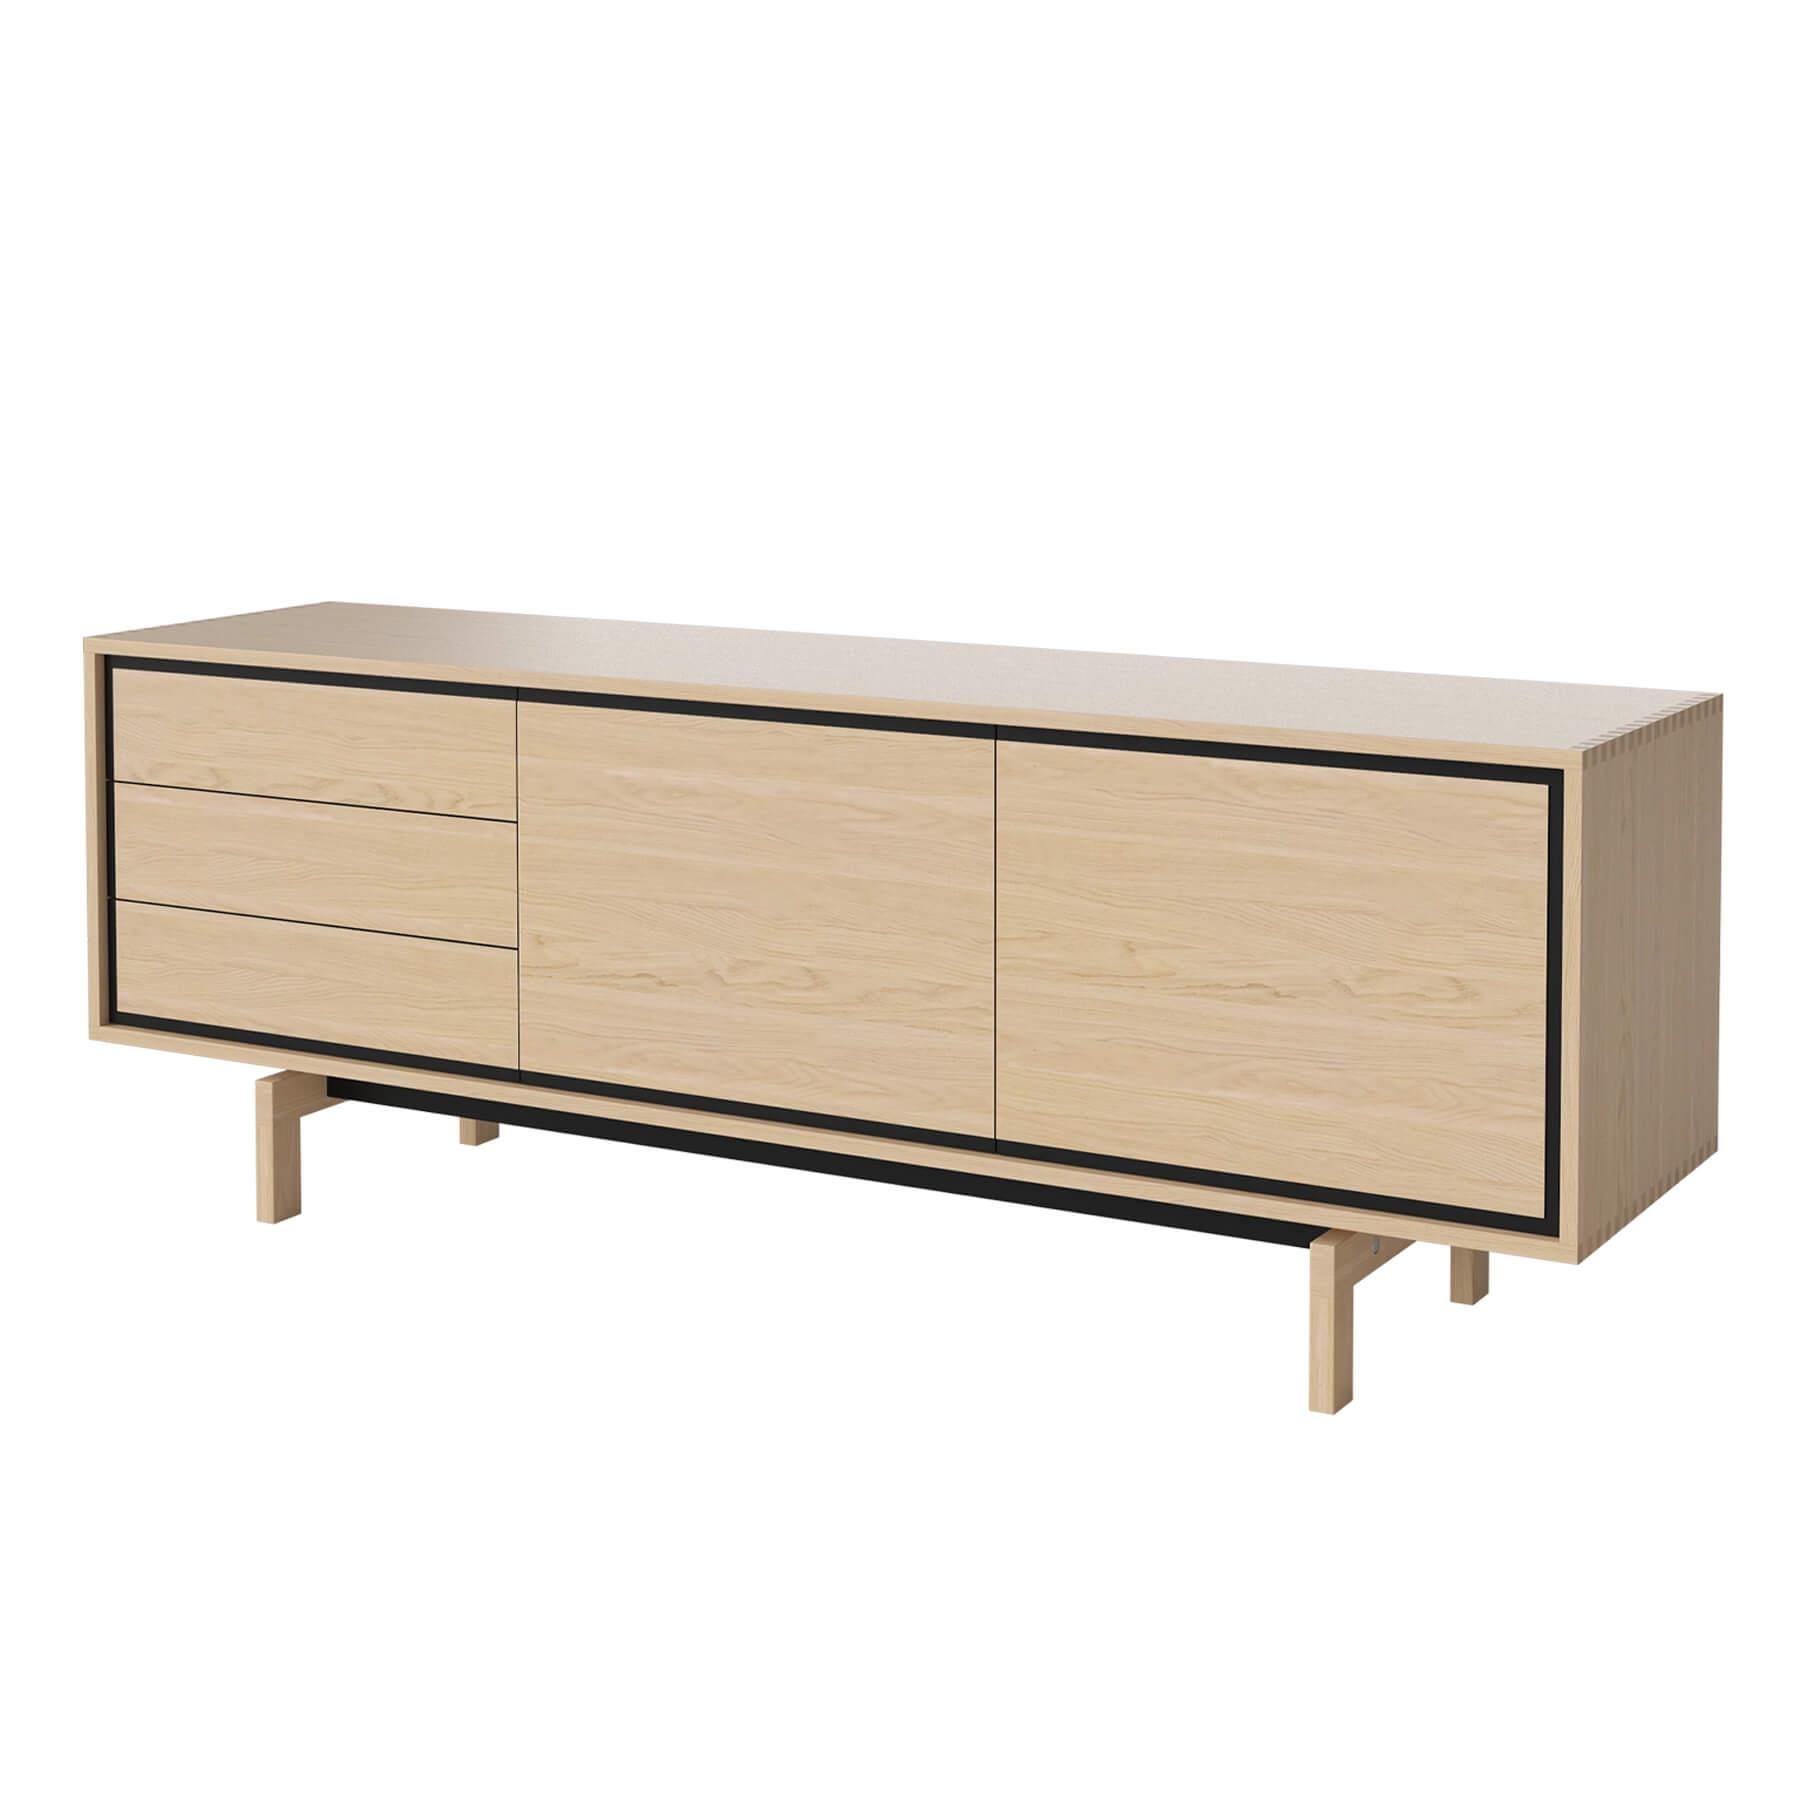 Bolia Floow Sideboard Large White Oiled Oak Light Wood Designer Furniture From Holloways Of Ludlow